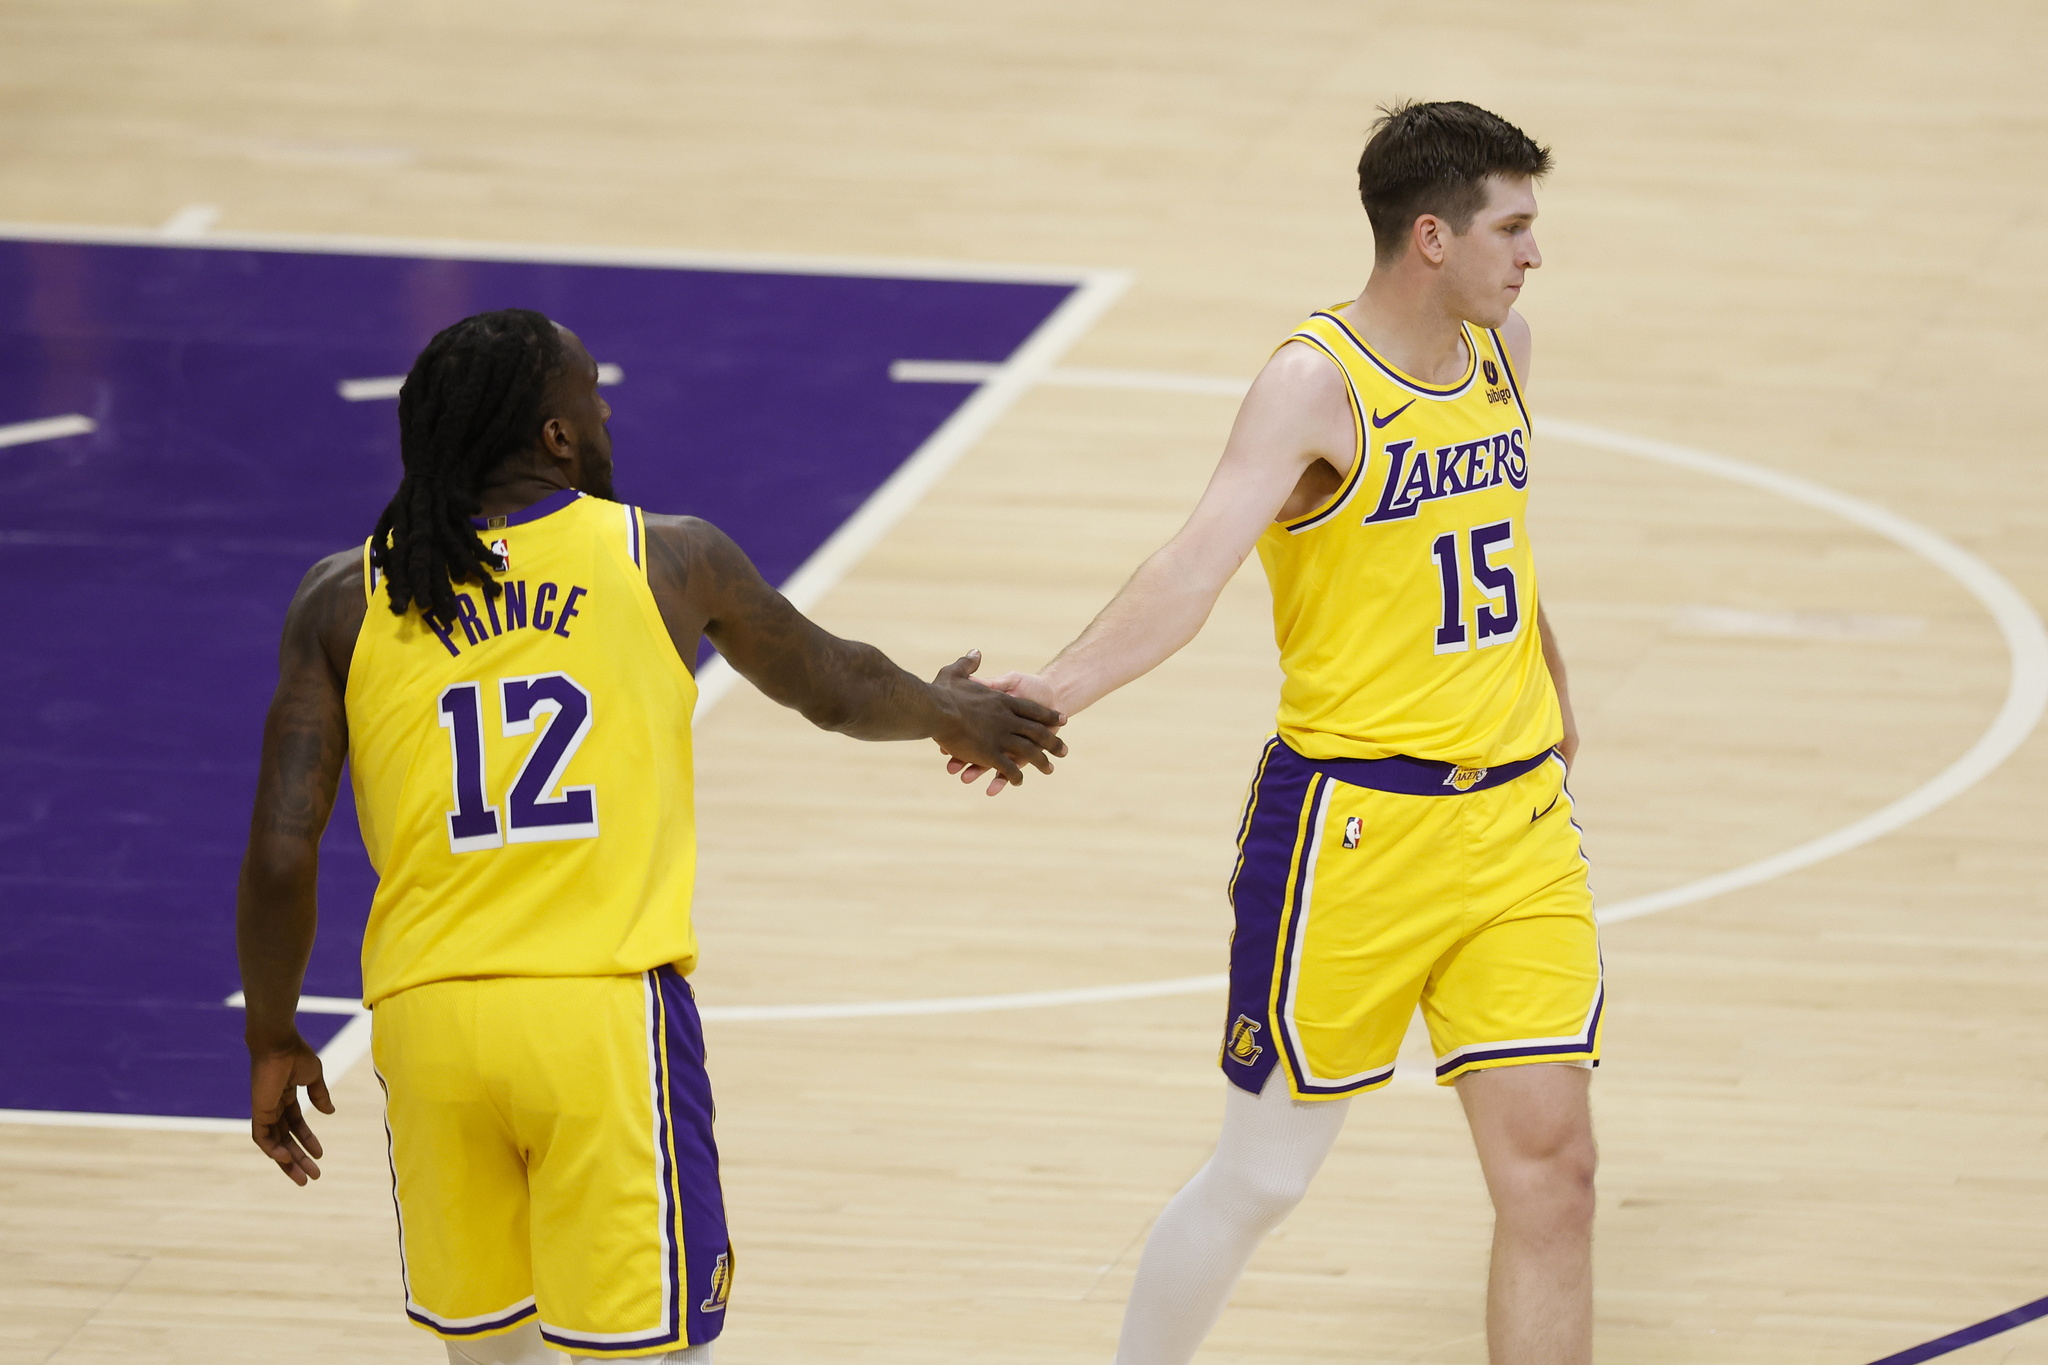 Lakers NBA Playoffs Projection: What are the odds that the Lakers make it to the next round?